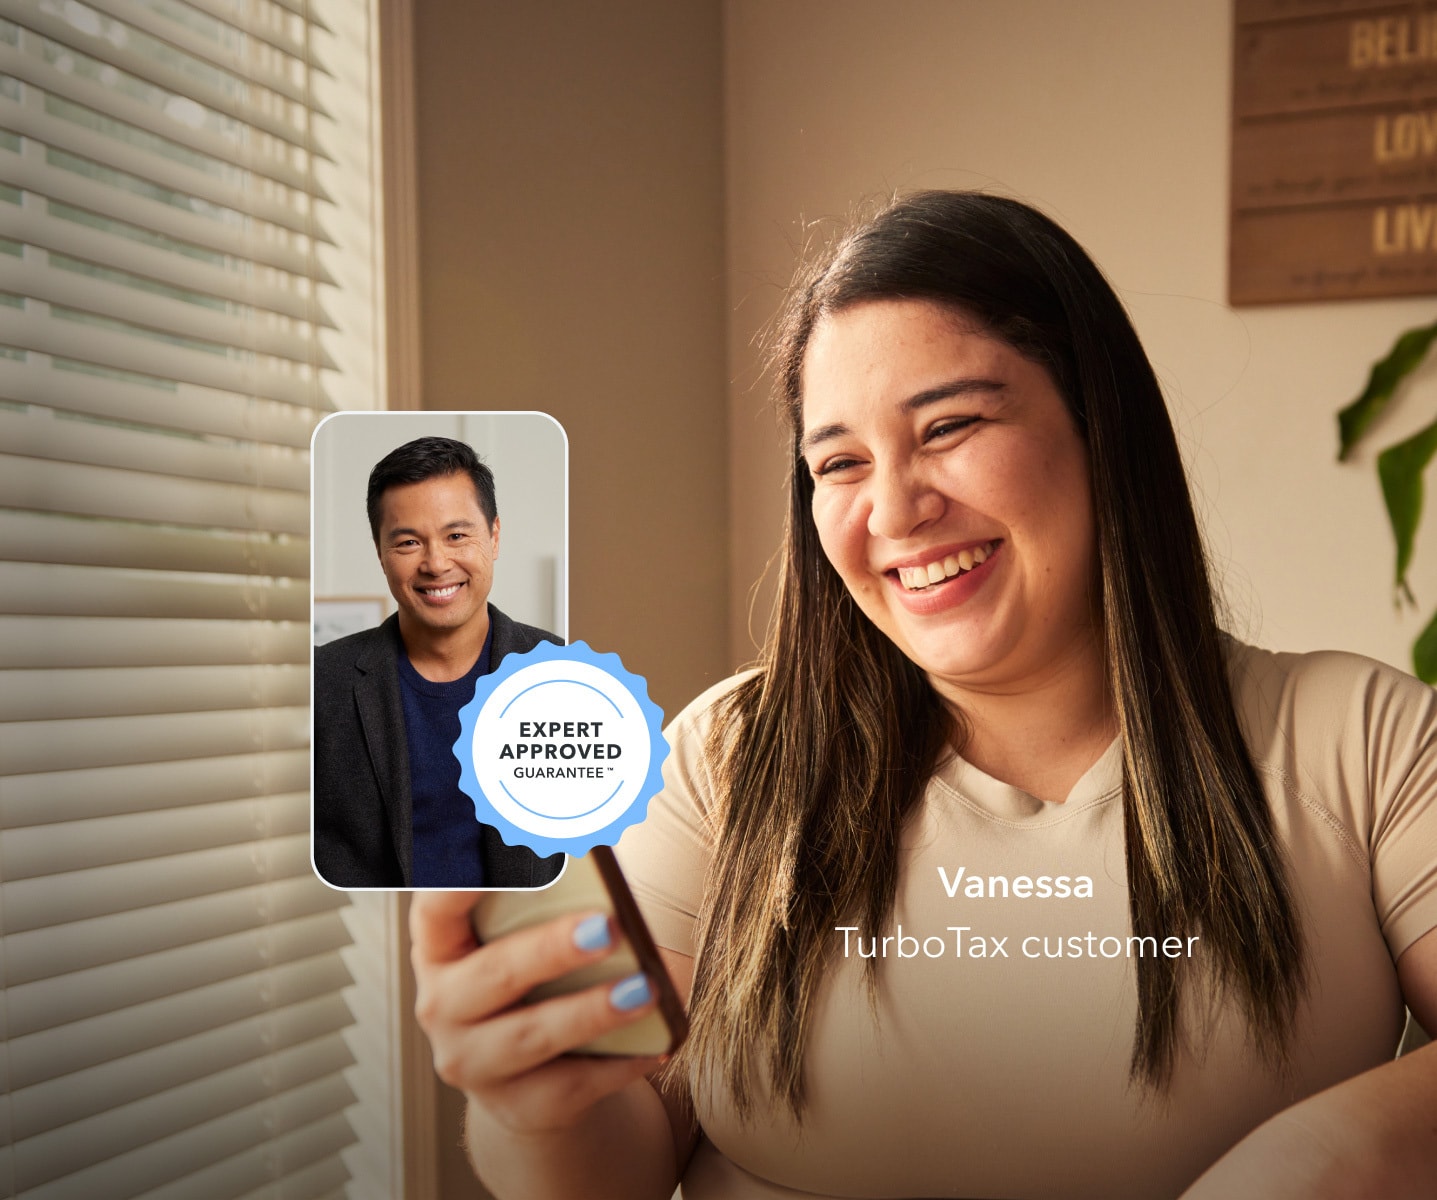 Vanessa, a TurboTax customer on working with her TurboTax expert, Neil who guarantees her taxes are expert approved so she can file with confidence.